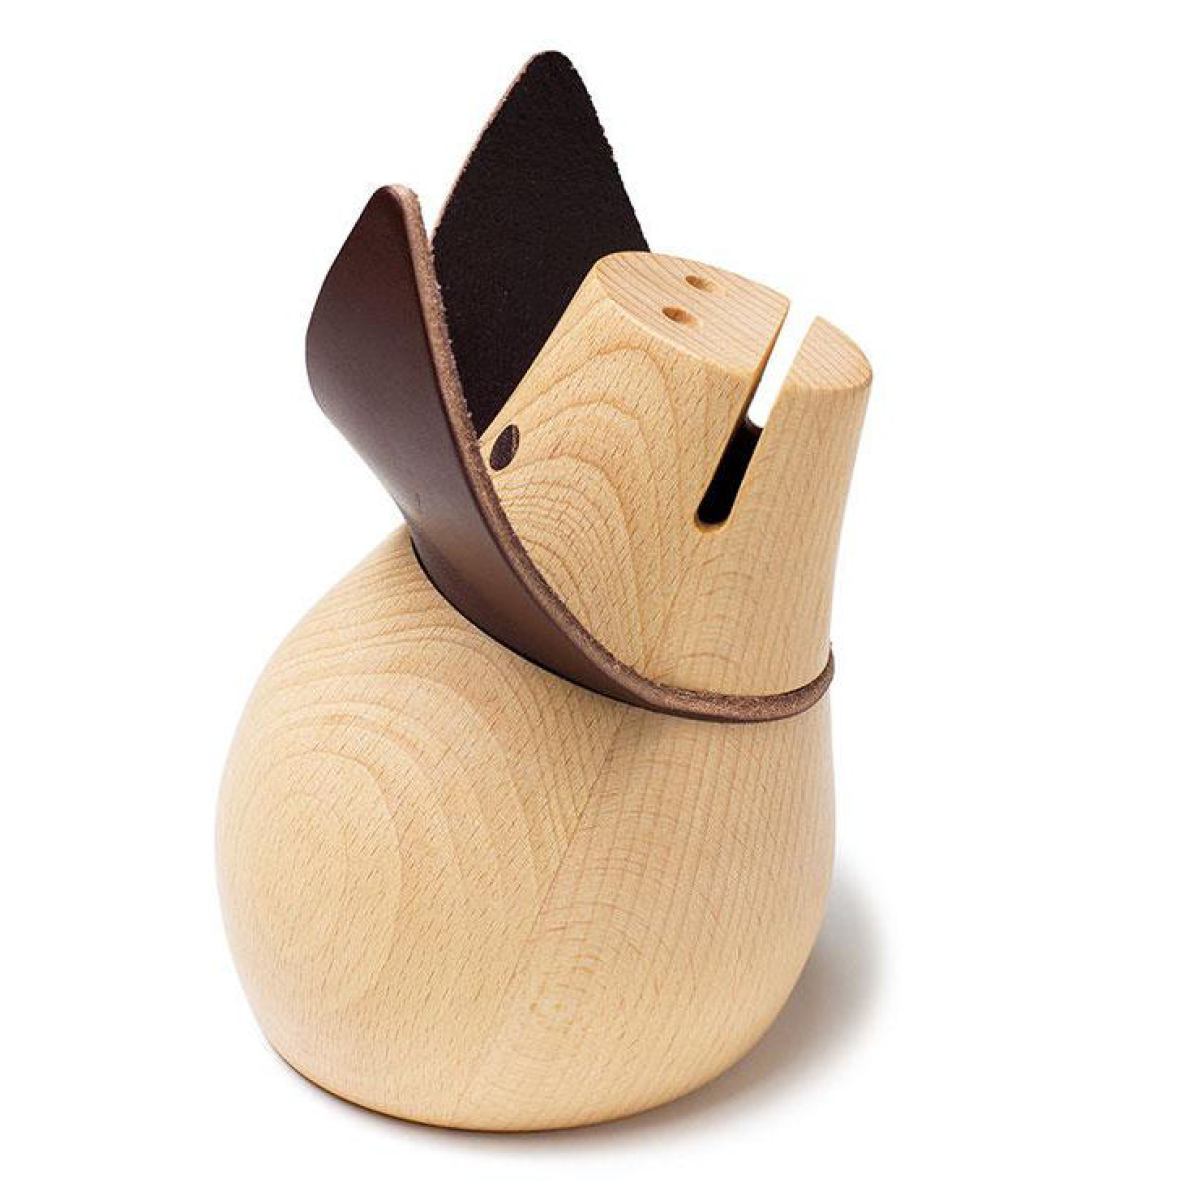 Money Box / Piggy Bank made of Wood with Leather Ears (two colors)